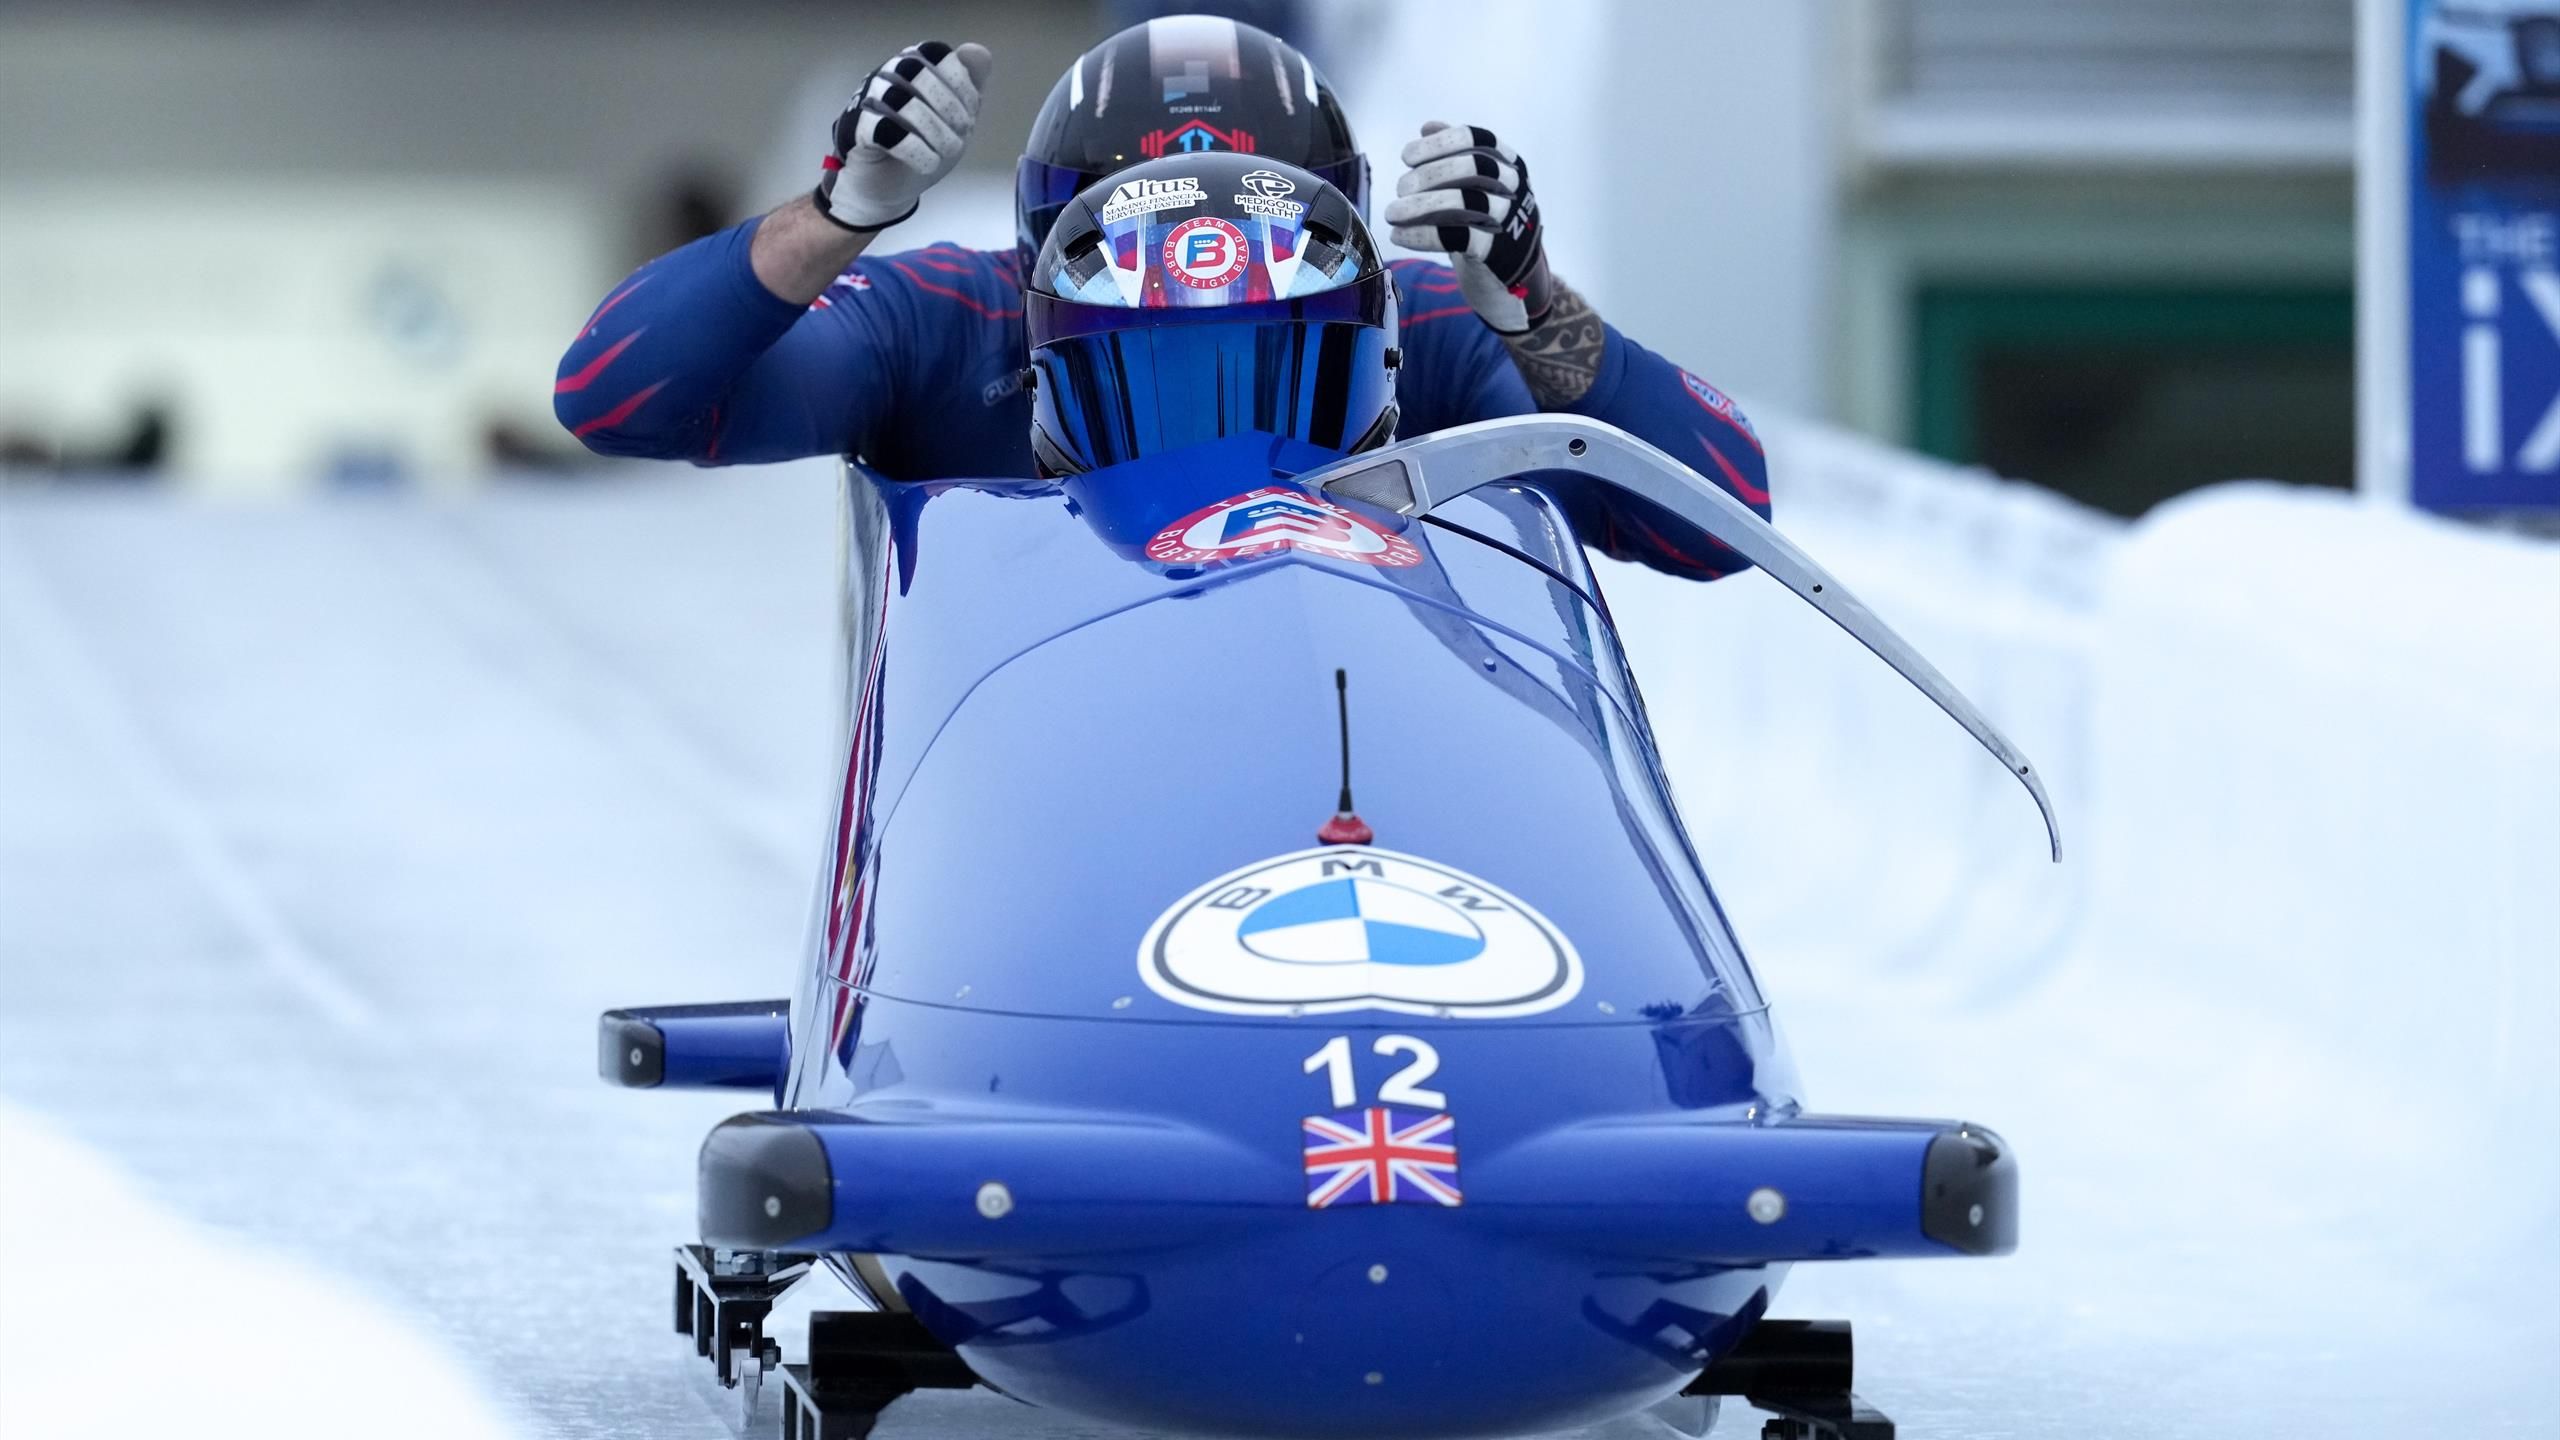 Bobsleigh at the Beijing Winter Olympics What are the rules? How do you steer? Who is the Team GB history maker?